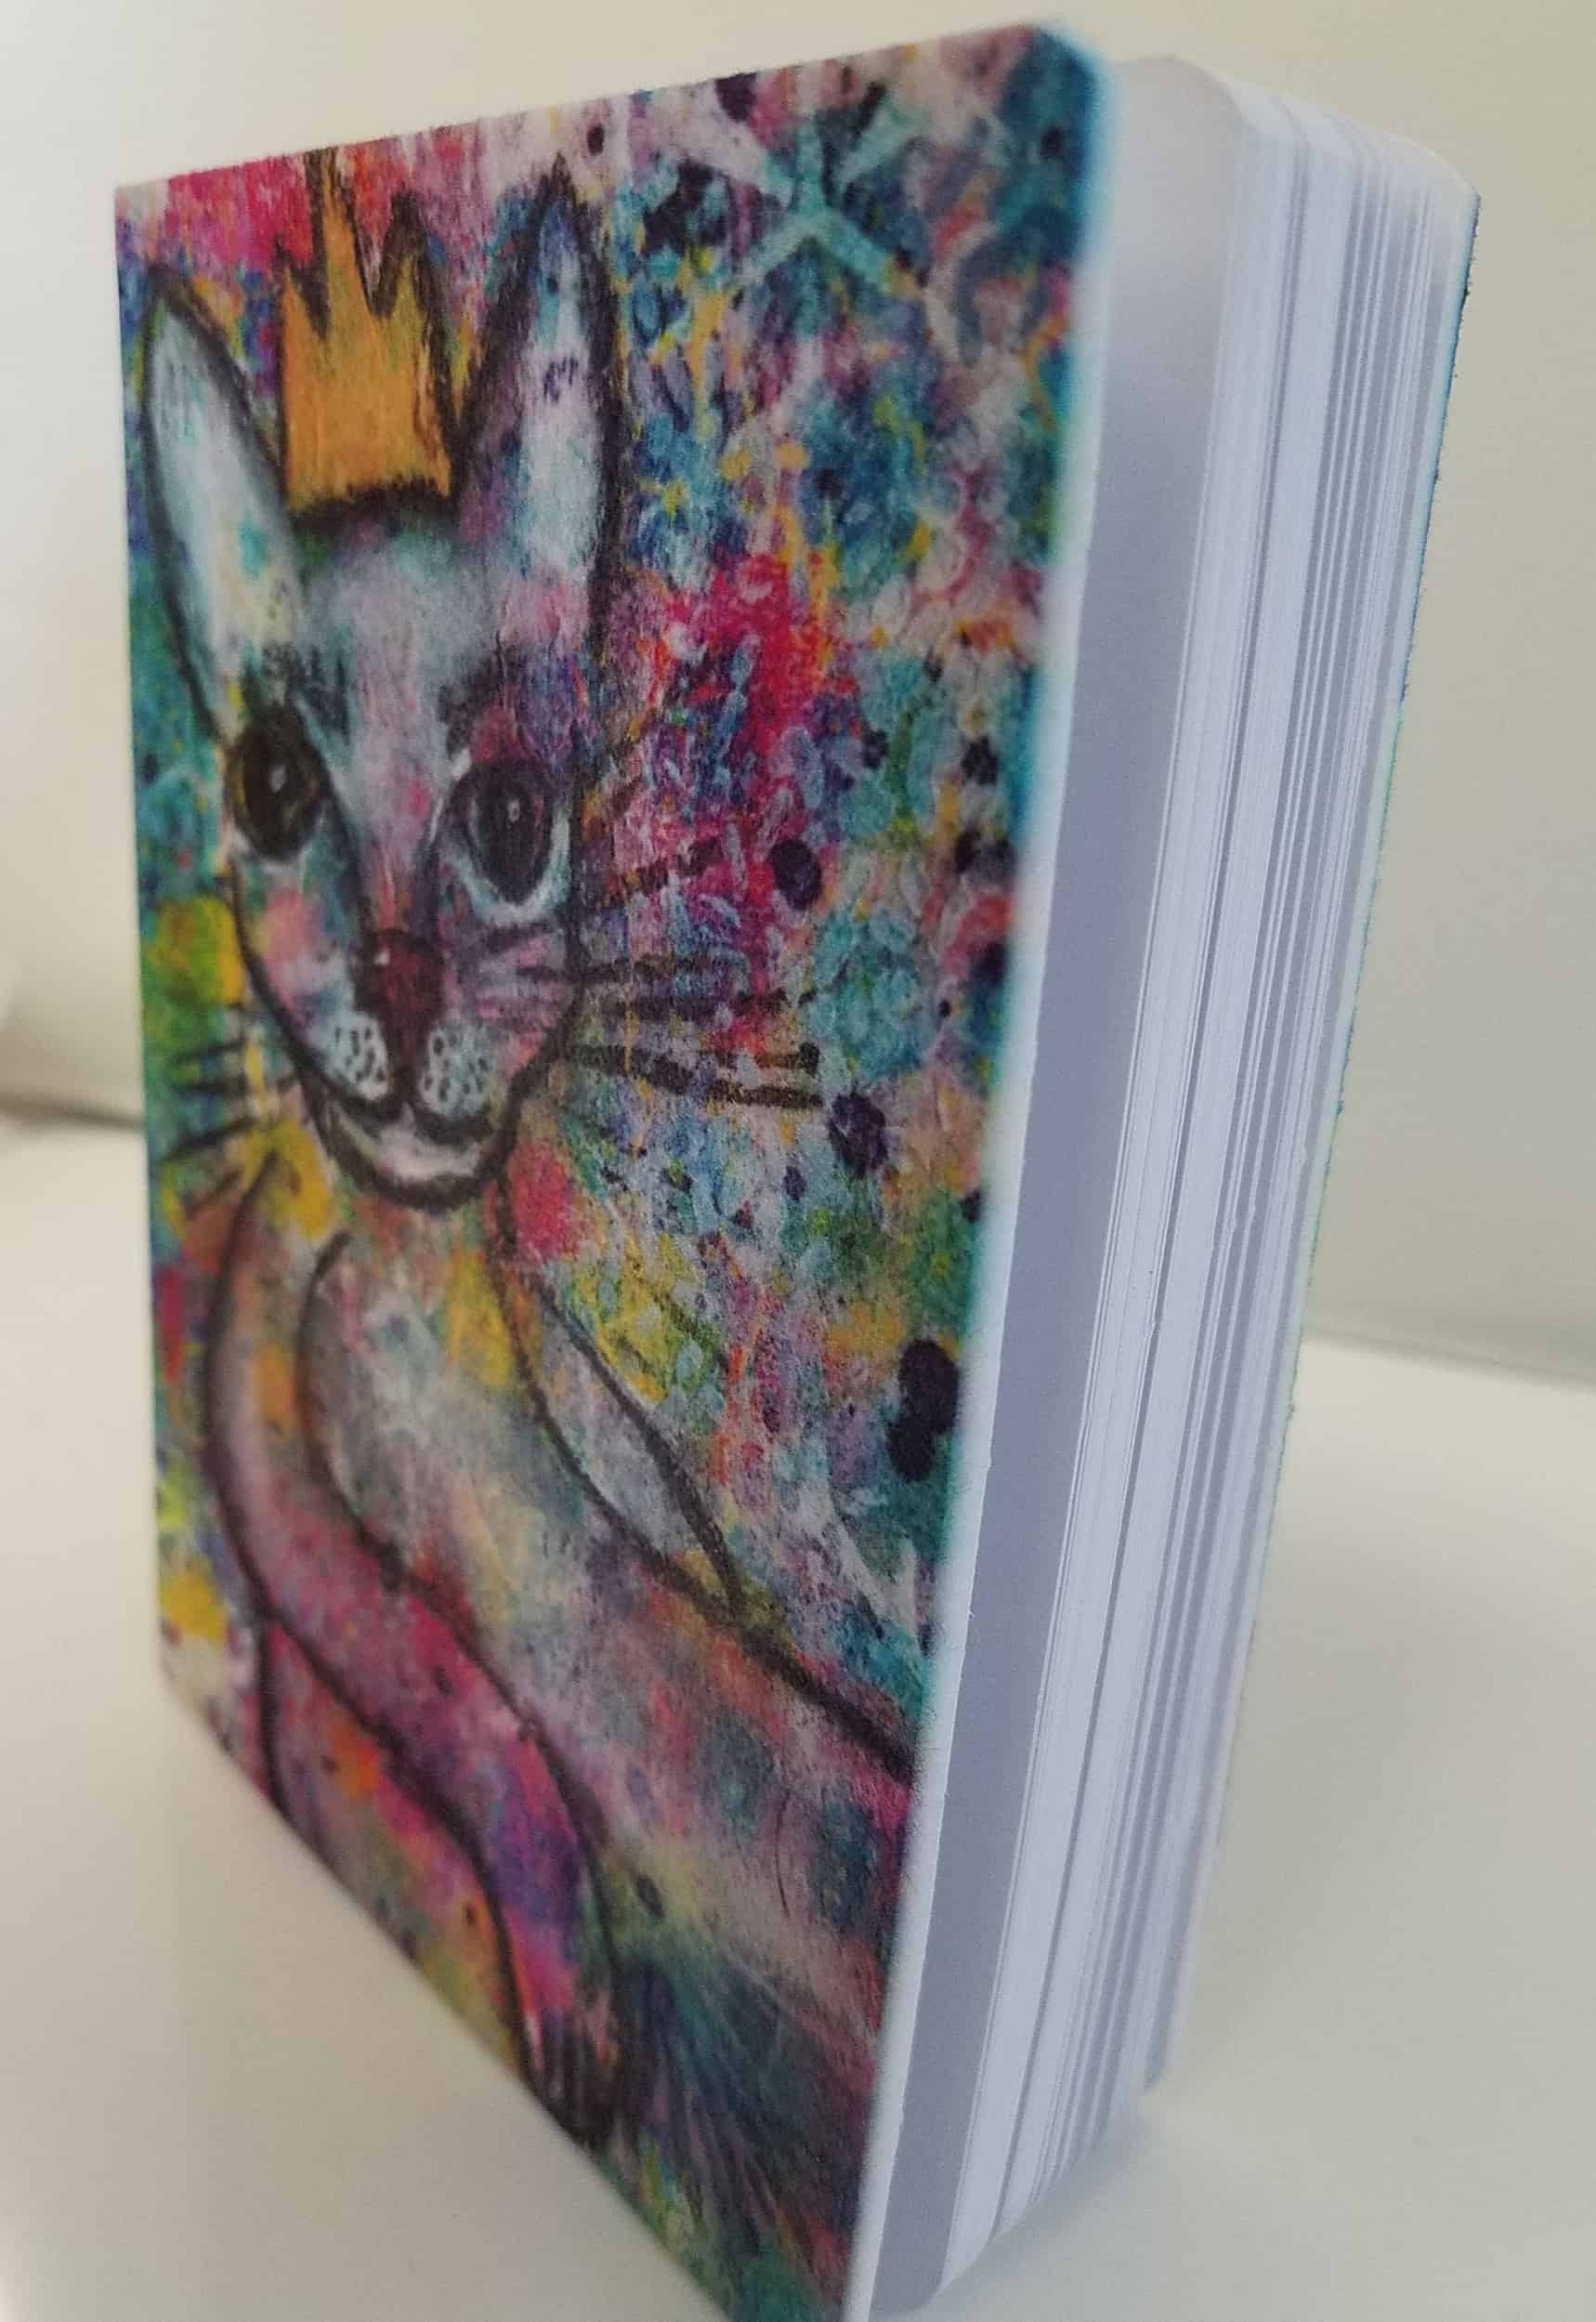 This Cool Cat "Luke" Crowned Critter Small Blank Journal for notes, lists, sketching and planning is made with love by Studio Patty D! Shop more unique gift ideas today with Spots Initiatives, the best way to support creators.